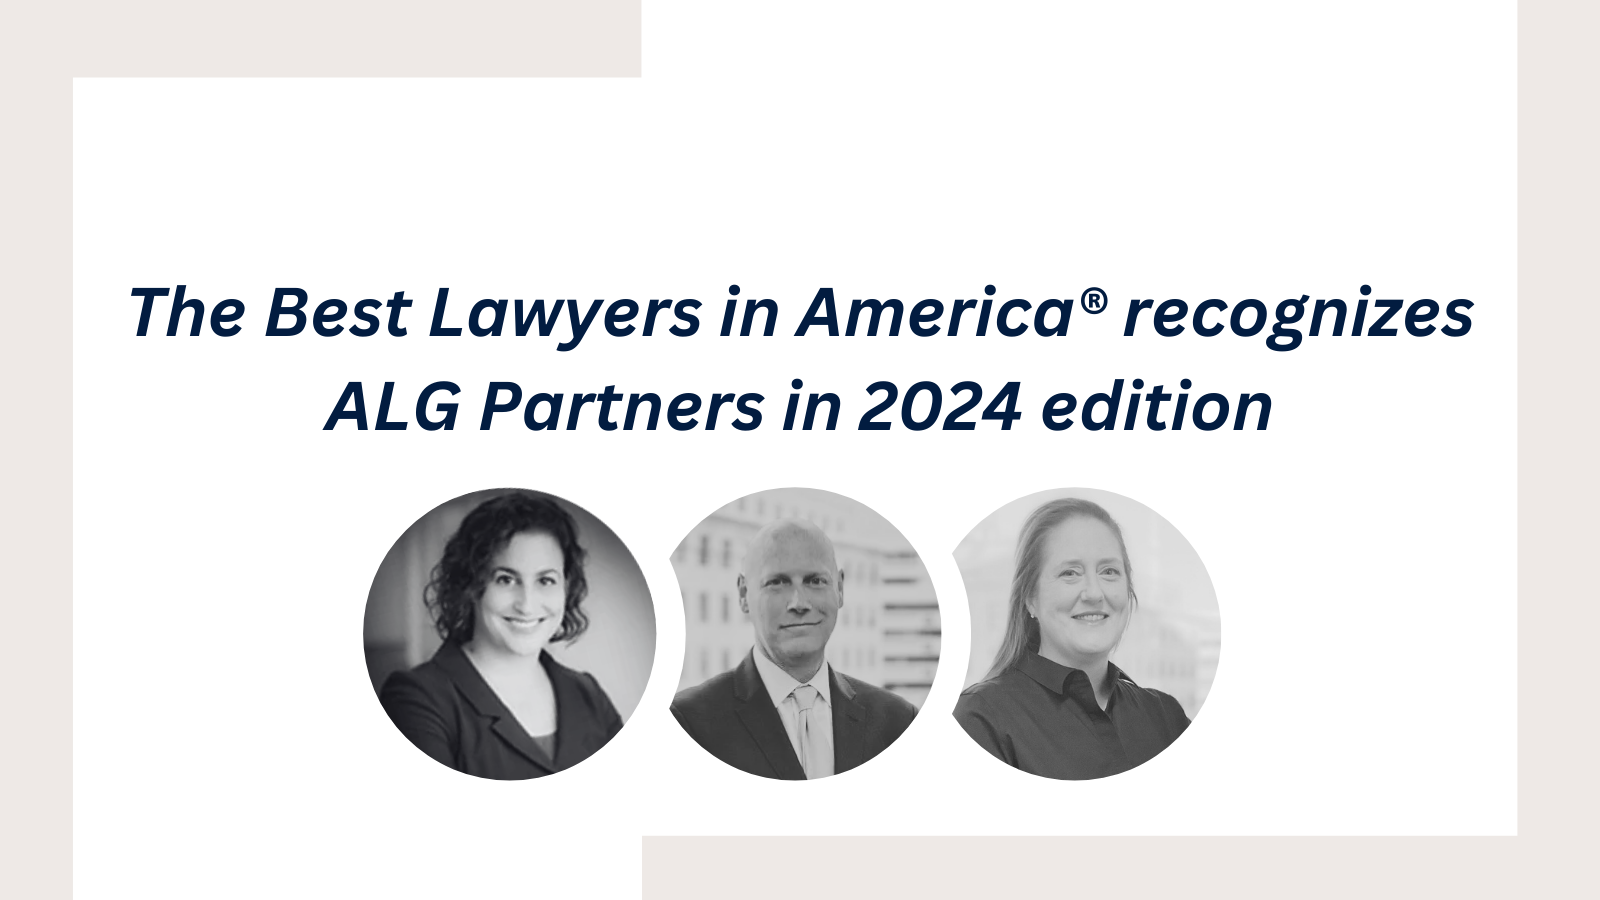 The Best Lawyers in America® recognizes ALG Partners in 2024 edition